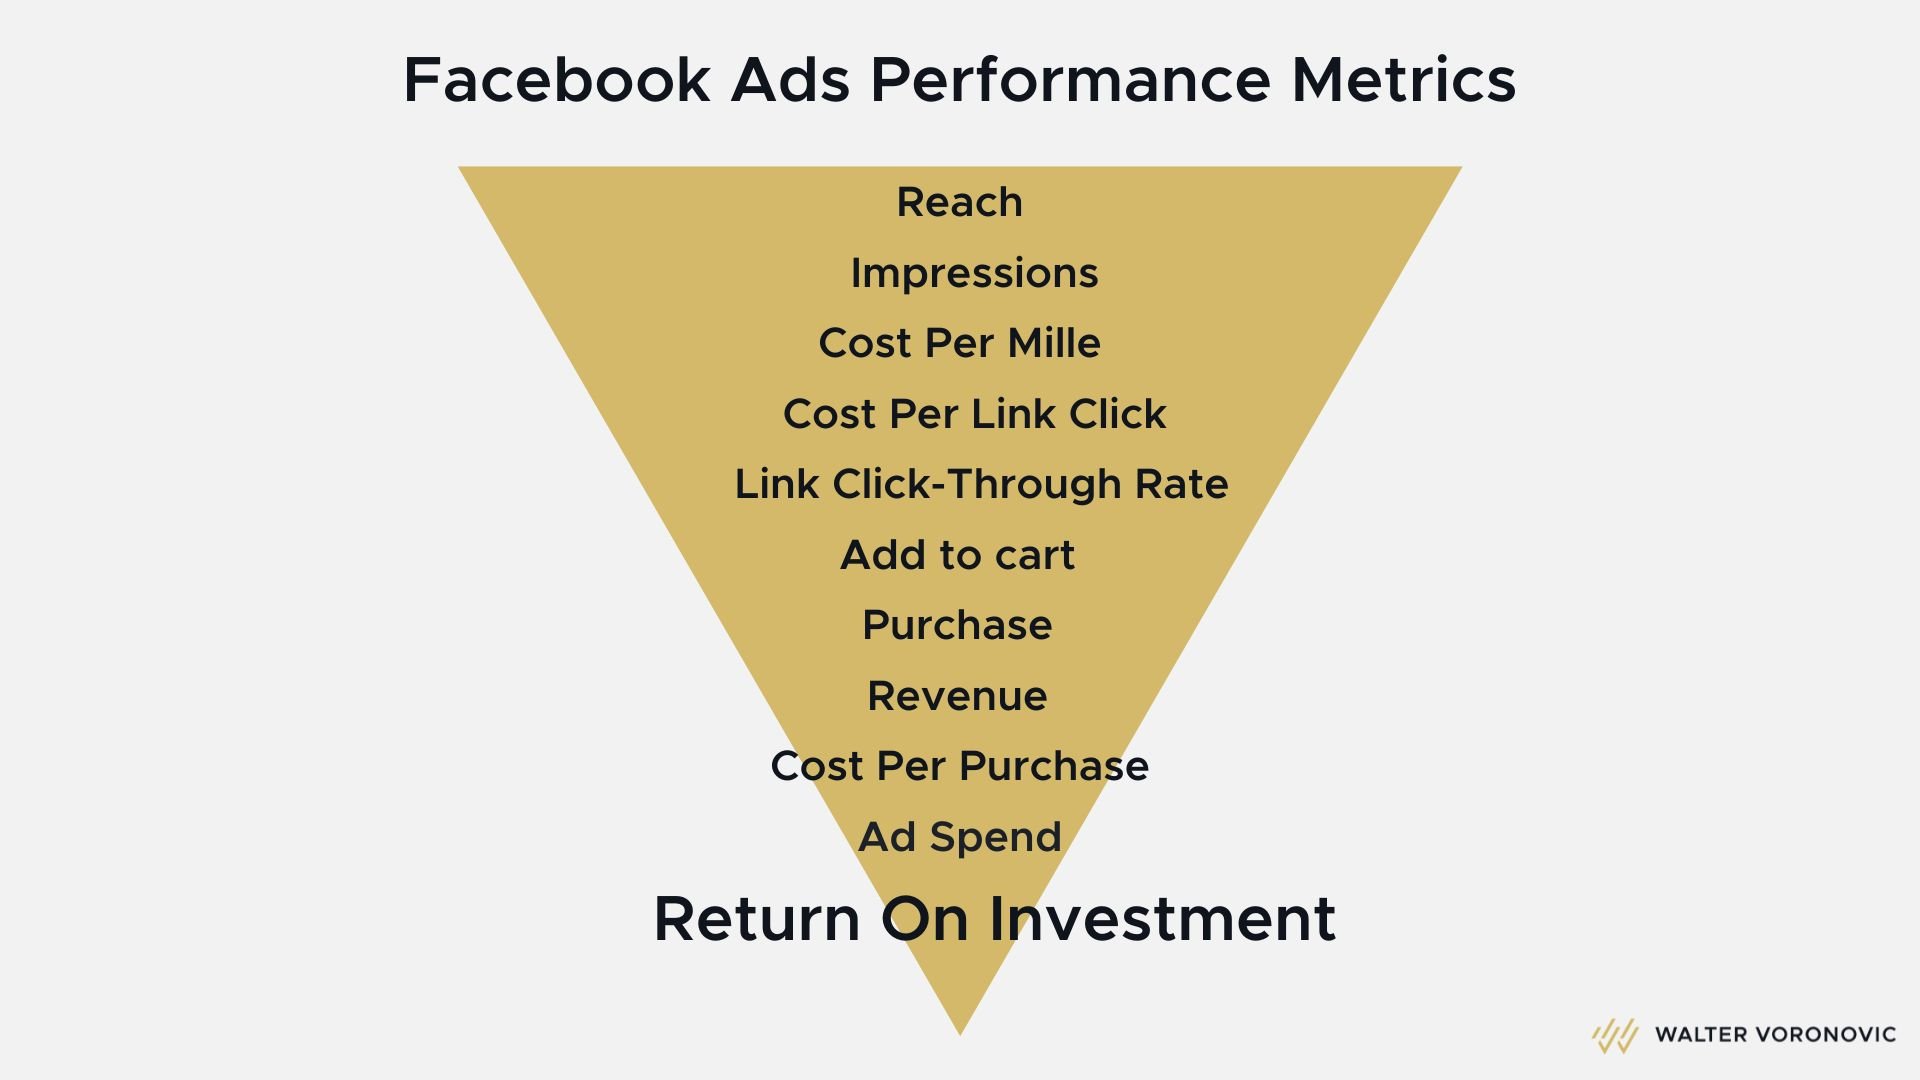 facebook ads performance, facebook ads metrics, what metrics to track on facebook